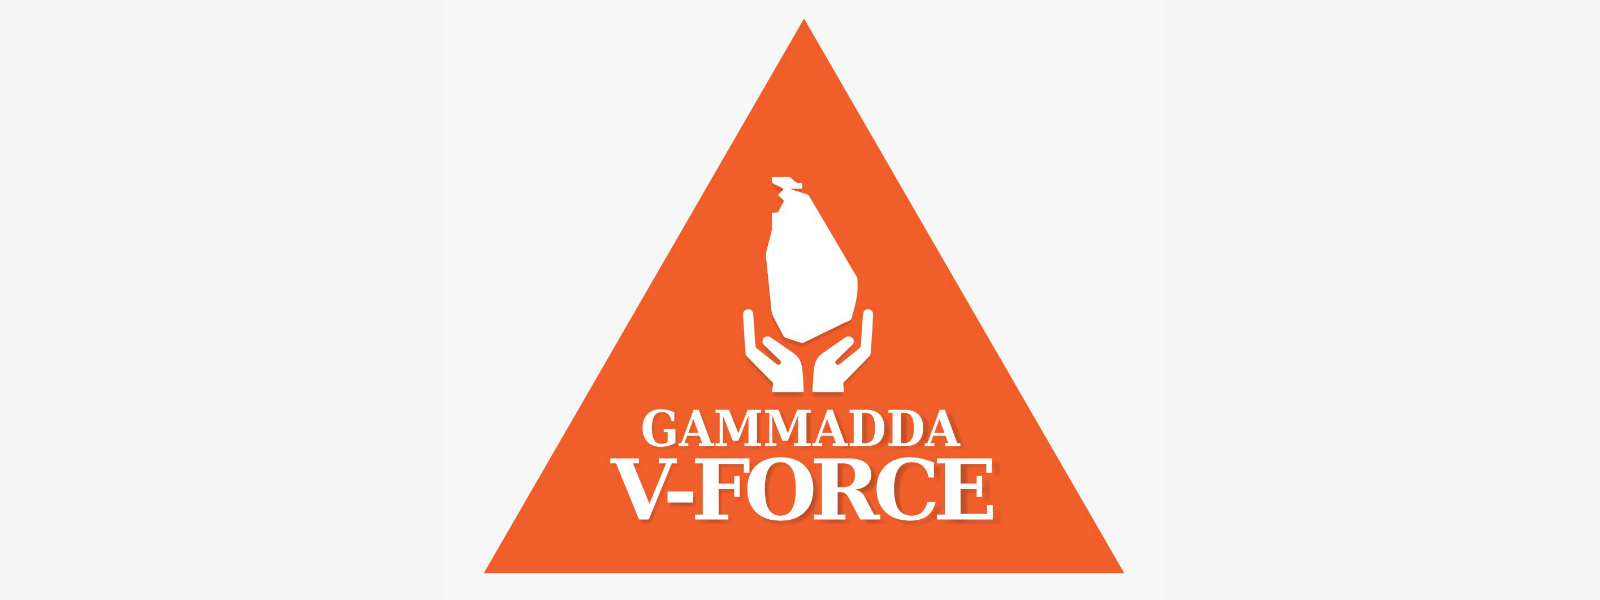 Official website of Gammdda V-Force launched